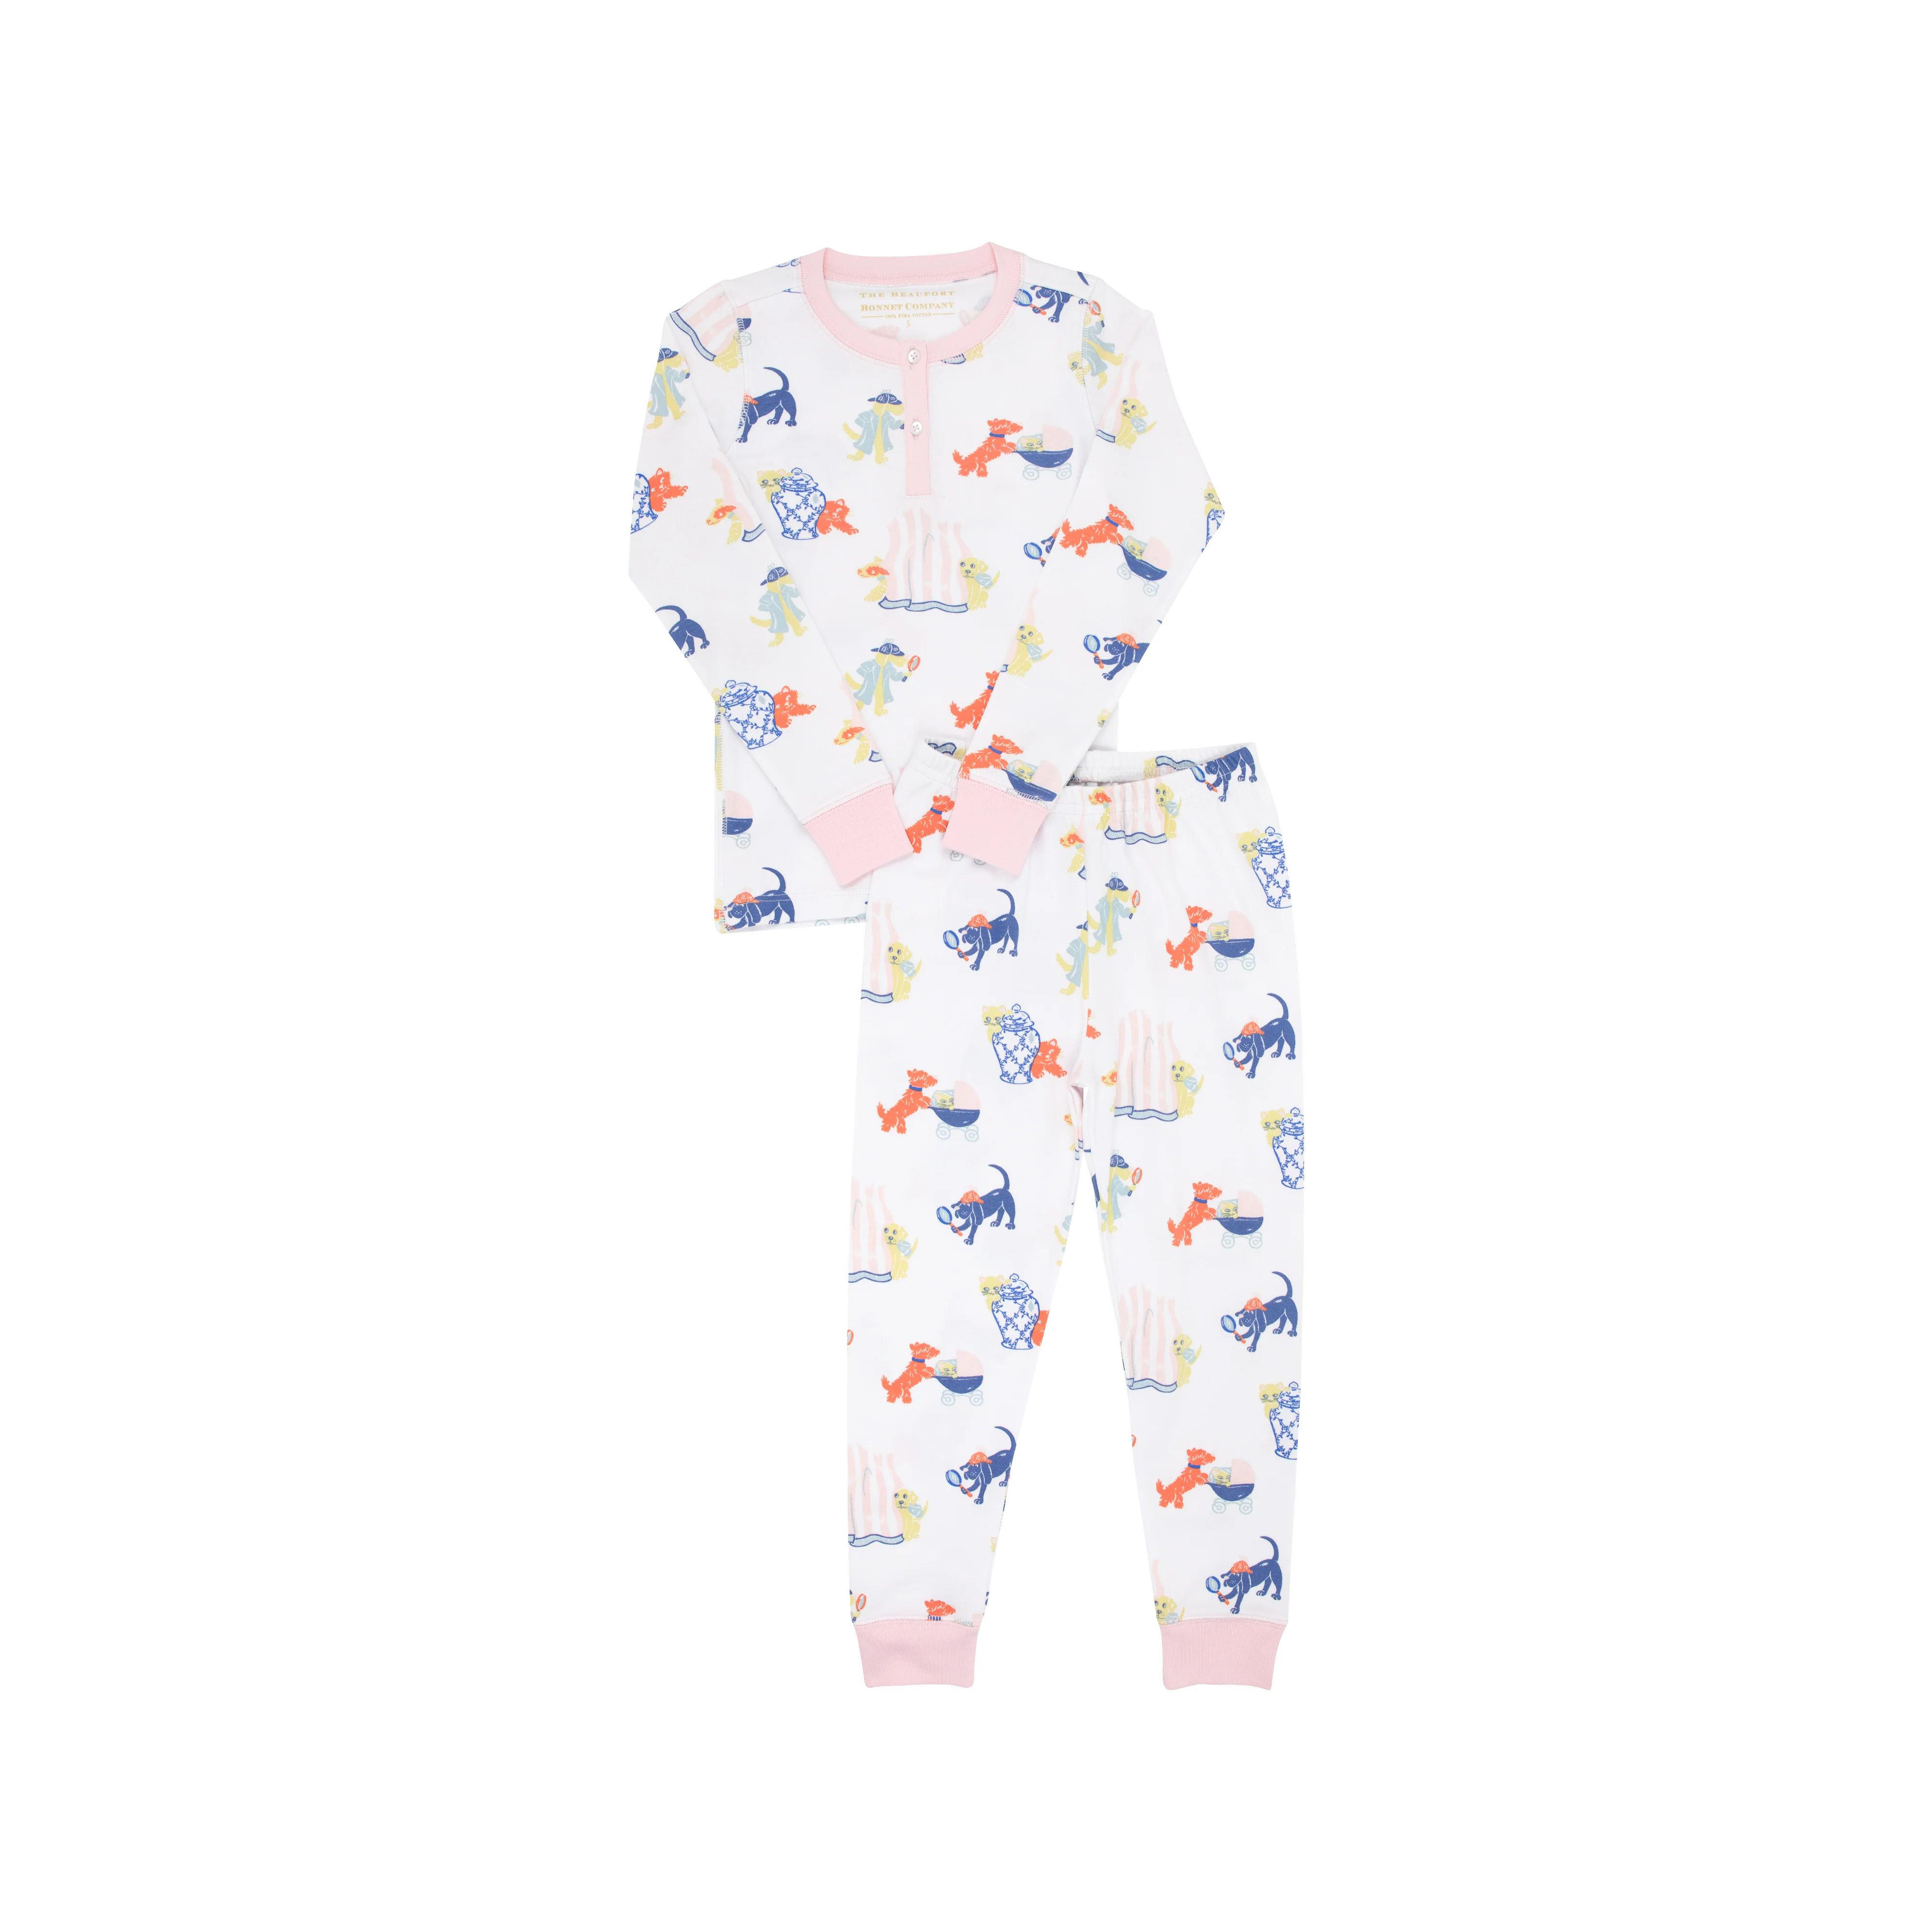 Sara Jane's Sweet Dream Set - Doggy Detectives with Palm Beach Pink | The Beaufort Bonnet Company